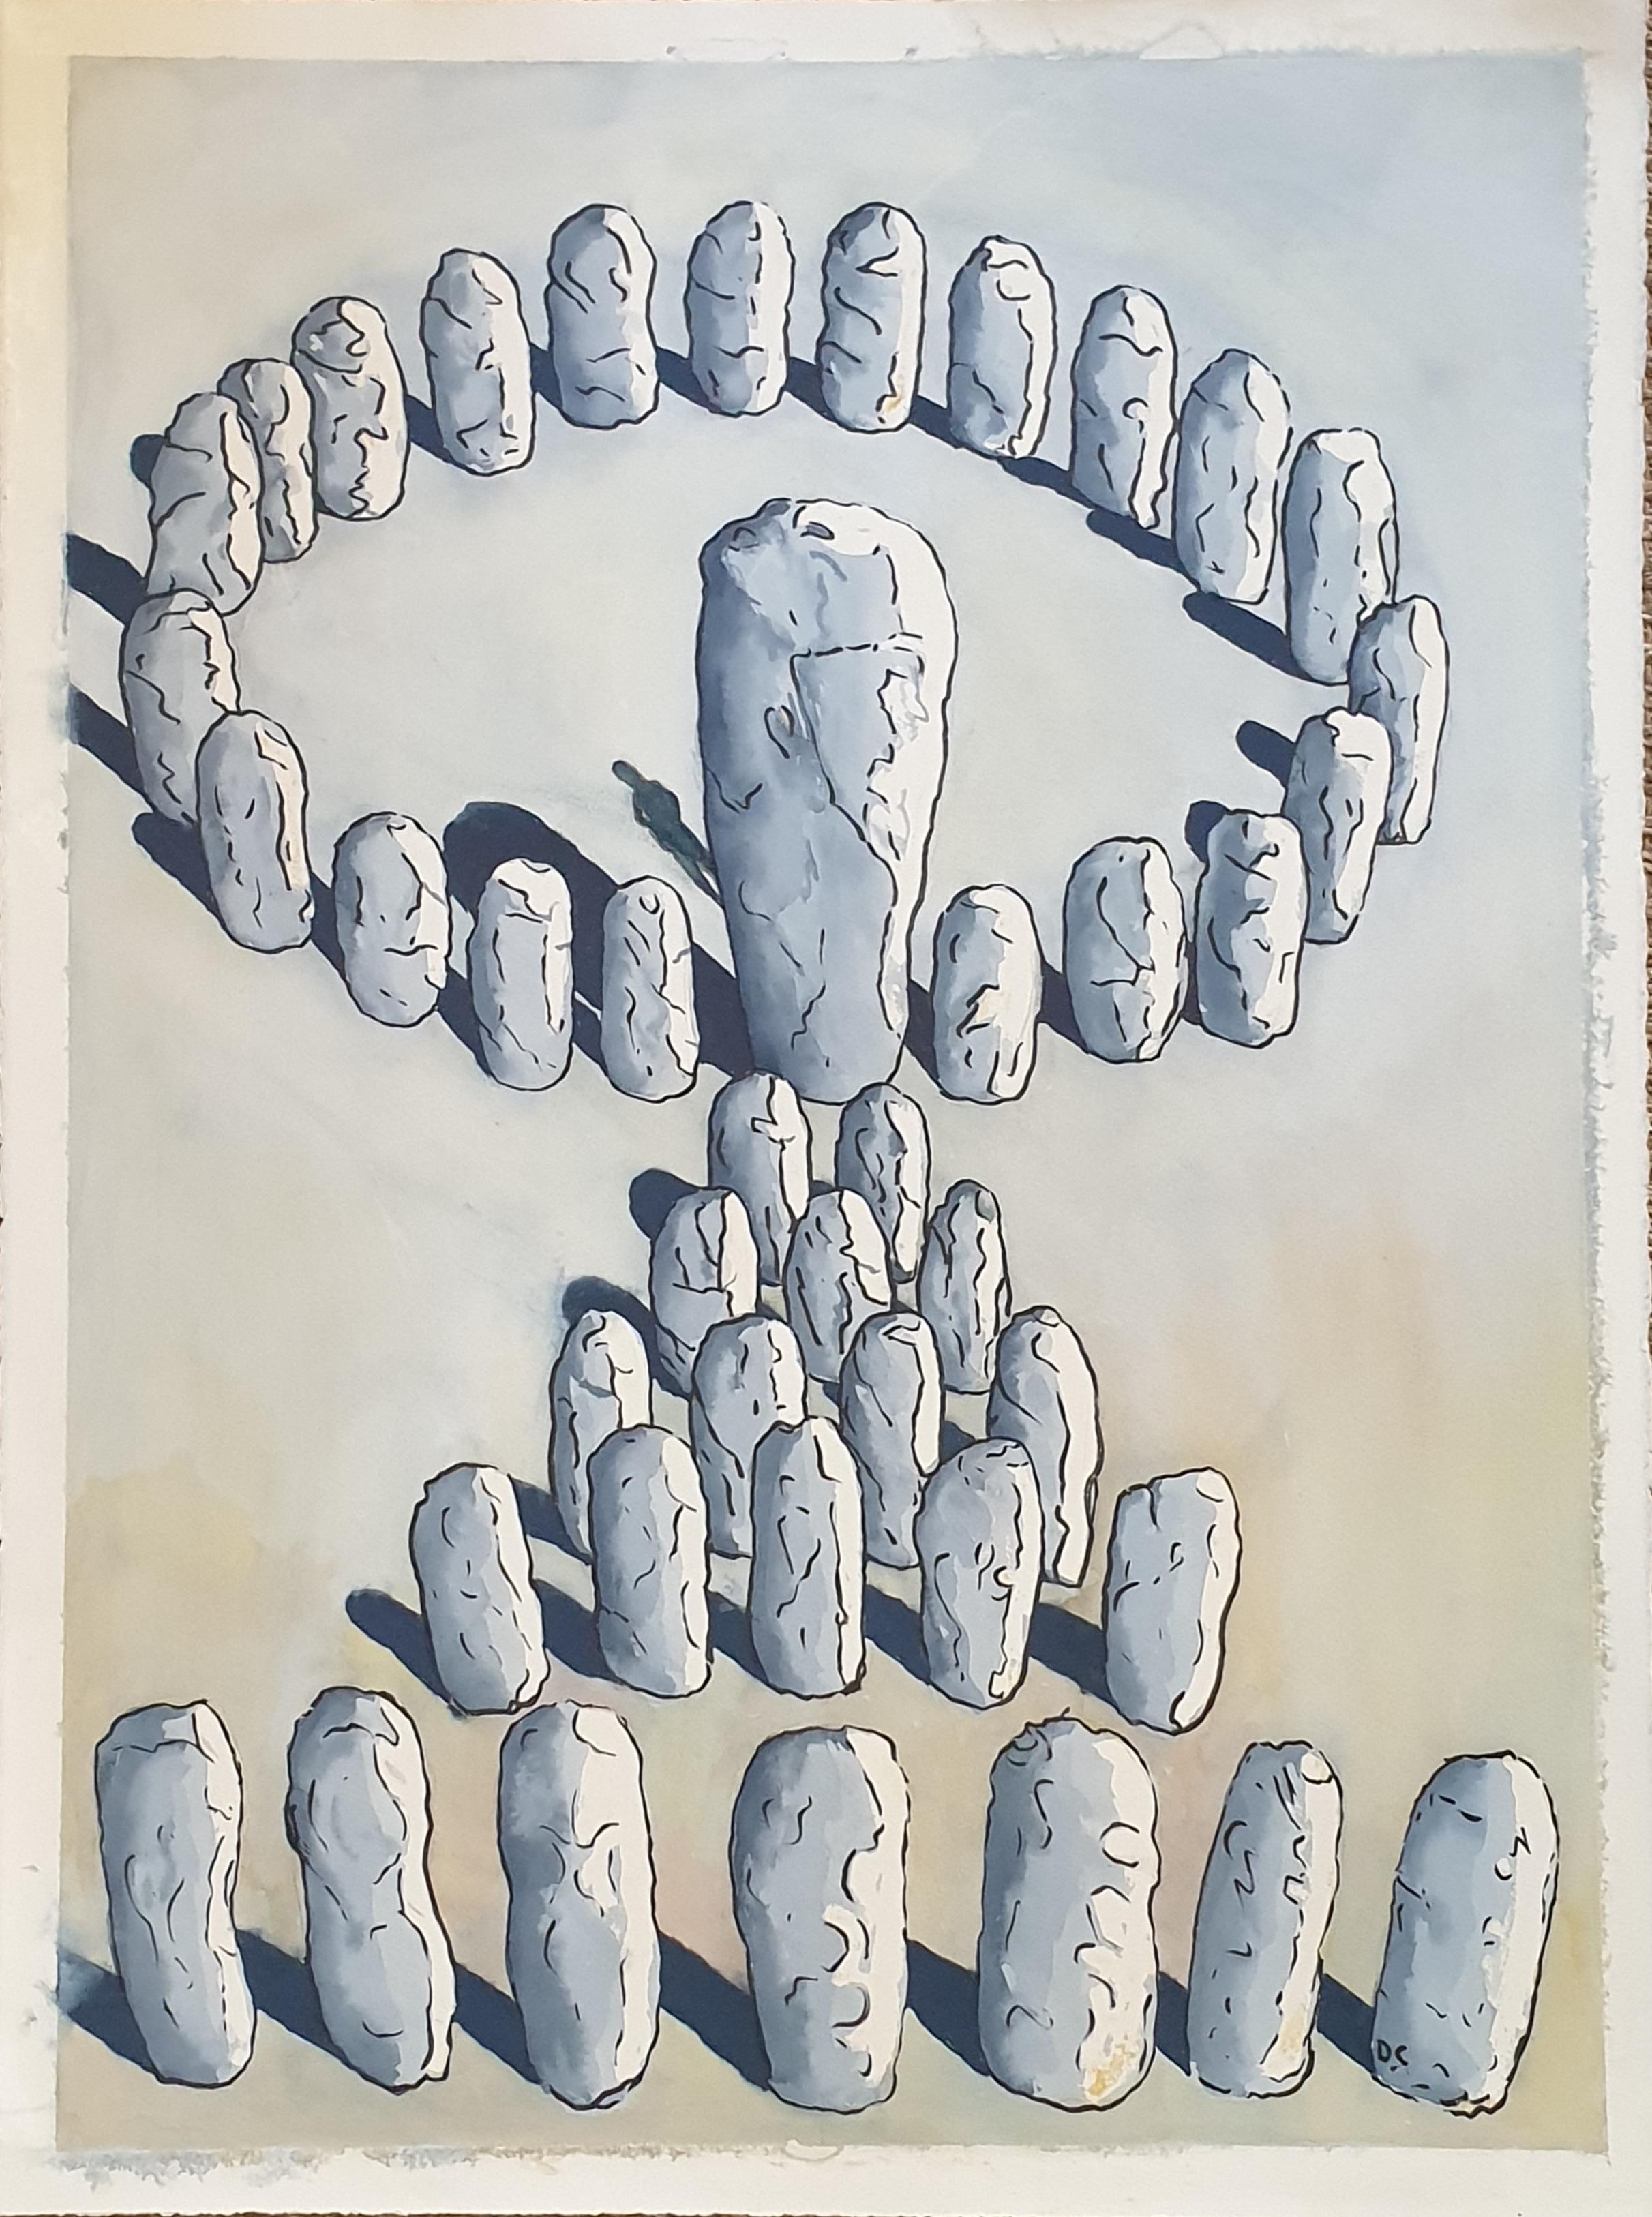 Derek Carruthers  Abstract Painting -  Surrealist Painting on Paper. '43 Stones'.